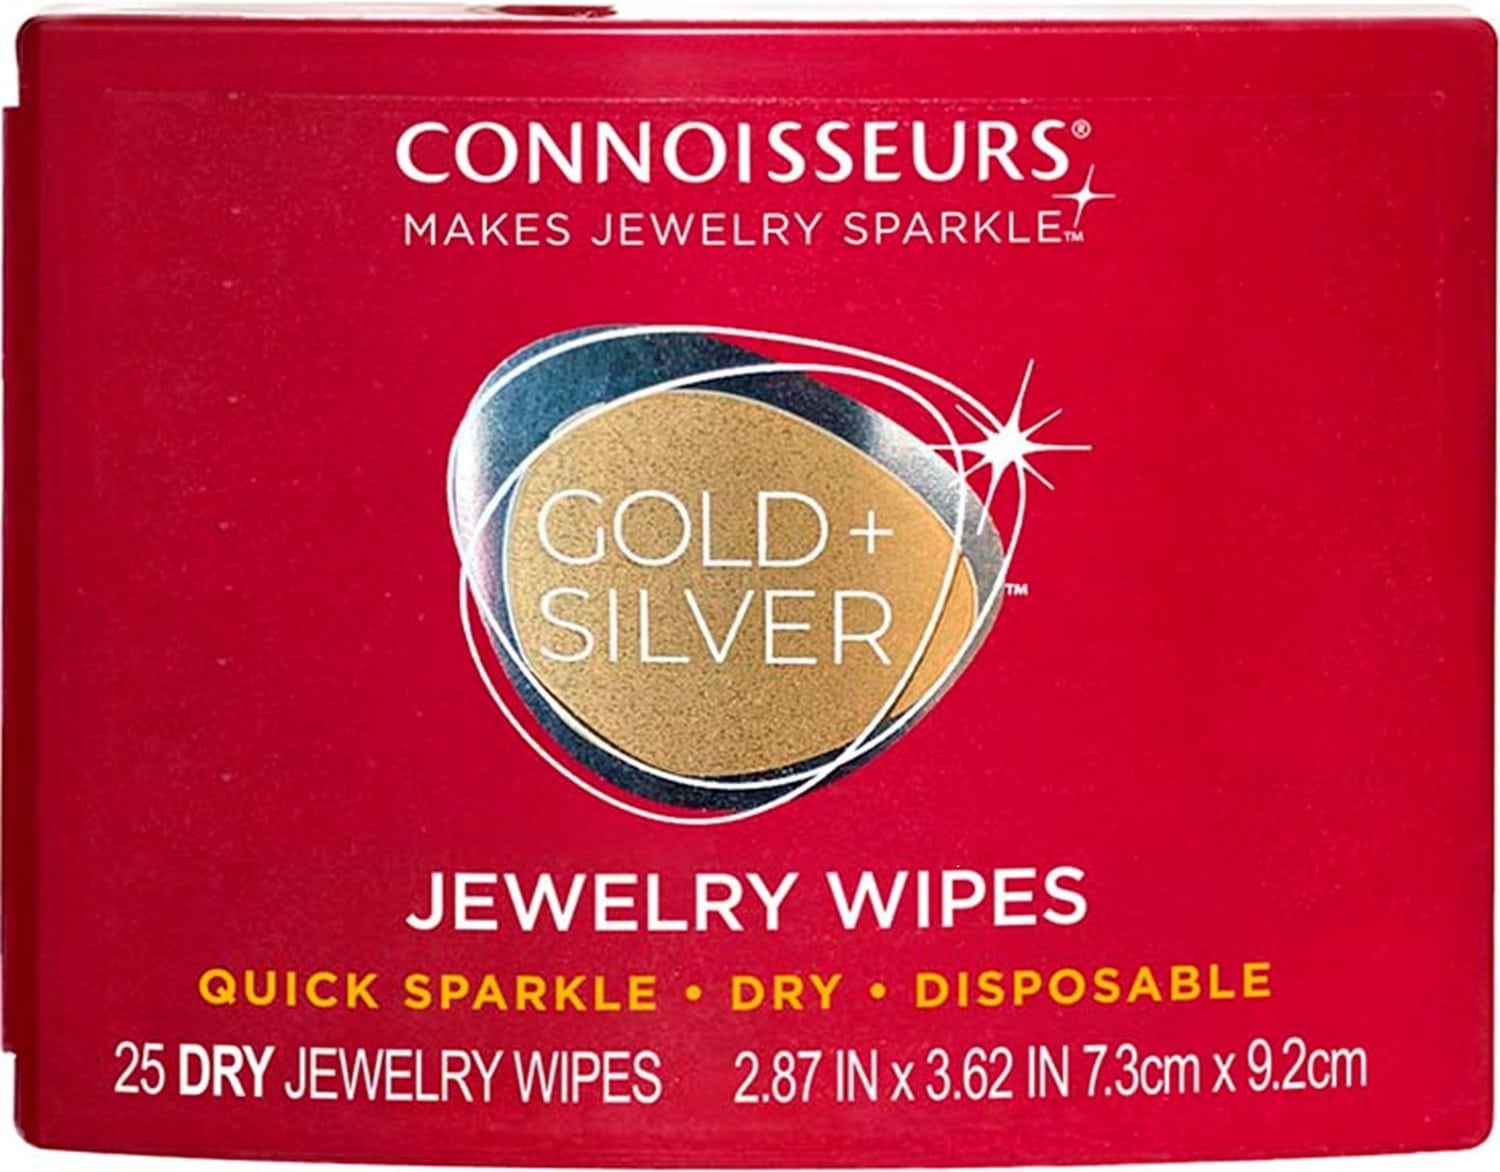 Gold and Silver Dry Jewellery Wipes_0